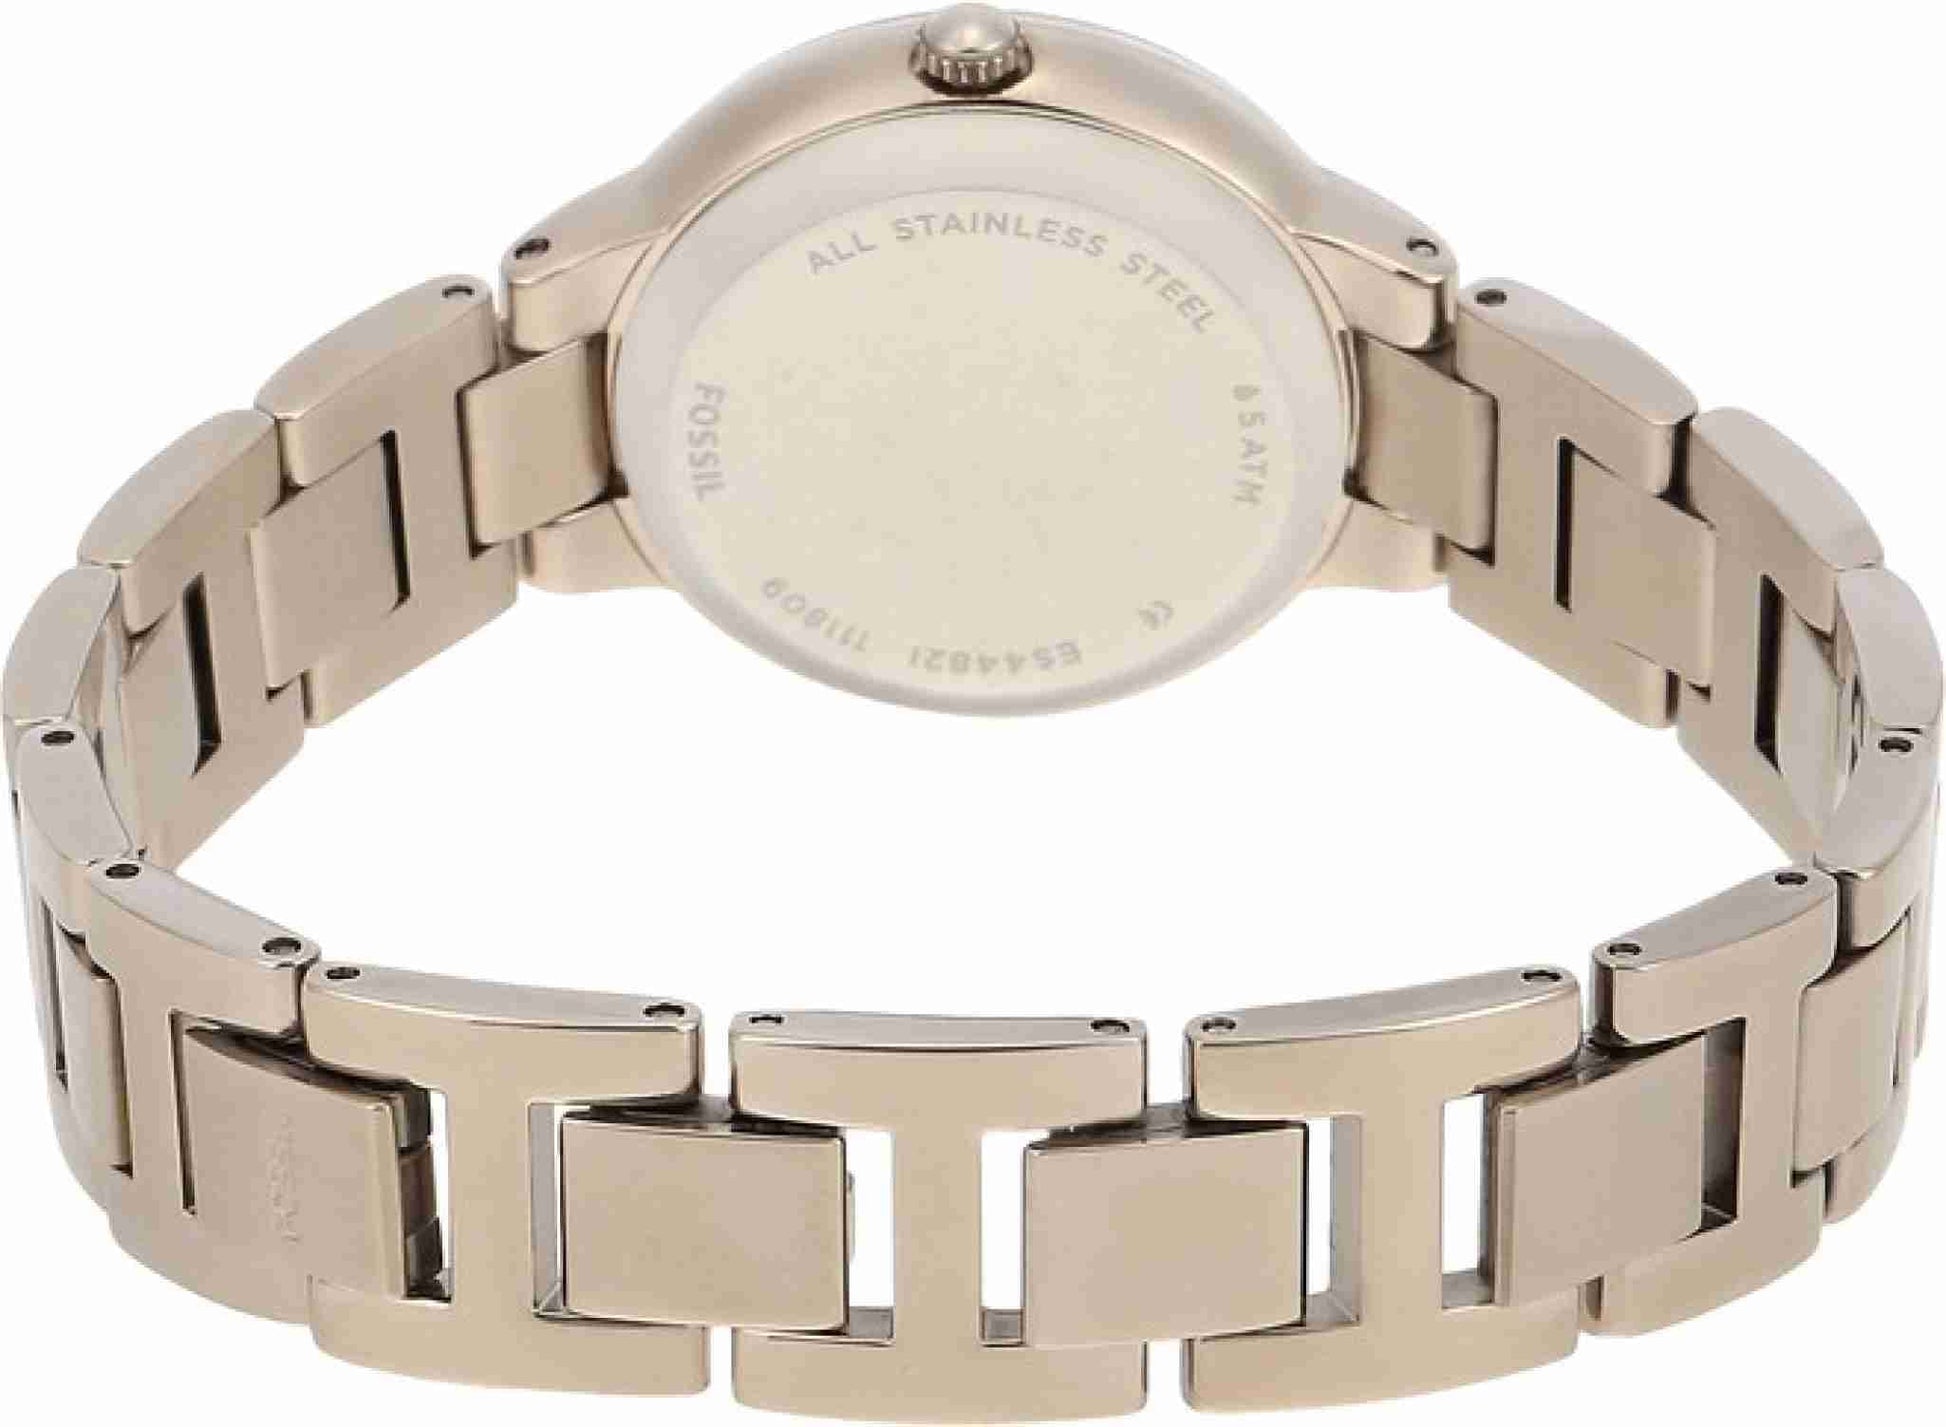 Fossil Virginia Pink Dial Pink Steel Strap Watch for Women - ES4482